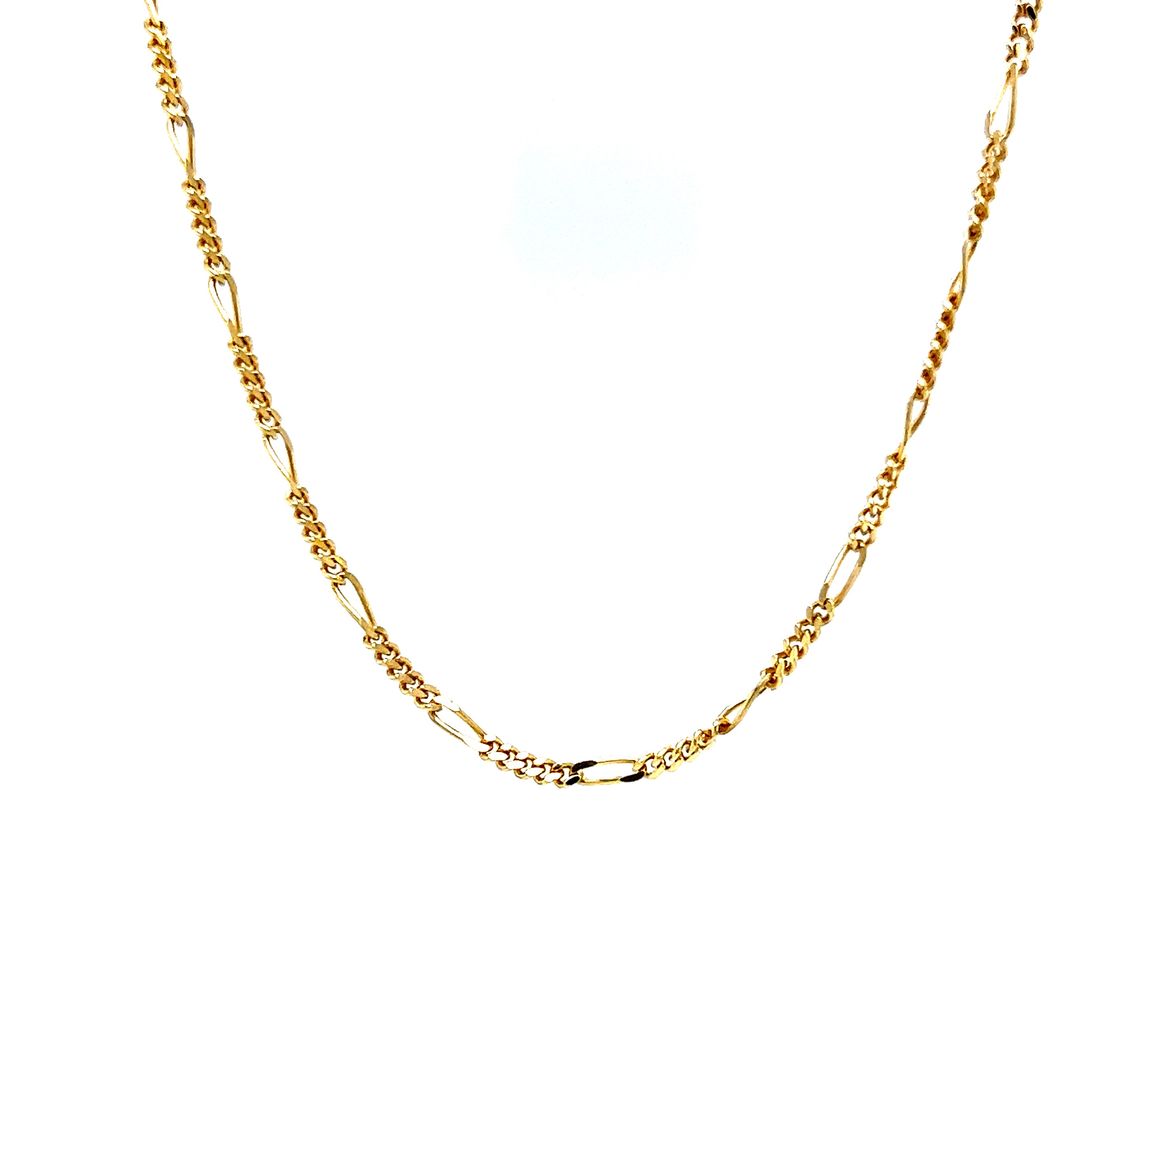 10K Yellow Gold Cuban Curb Chain Necklace Unisex, 10K Gold Chain, 2.2 MM  Real 10K Gold Italian Cuban Curb Chain With Lobster Clasp,10 Karat Gold  Chain, Flawless Gift Box Included : Amazon.in: